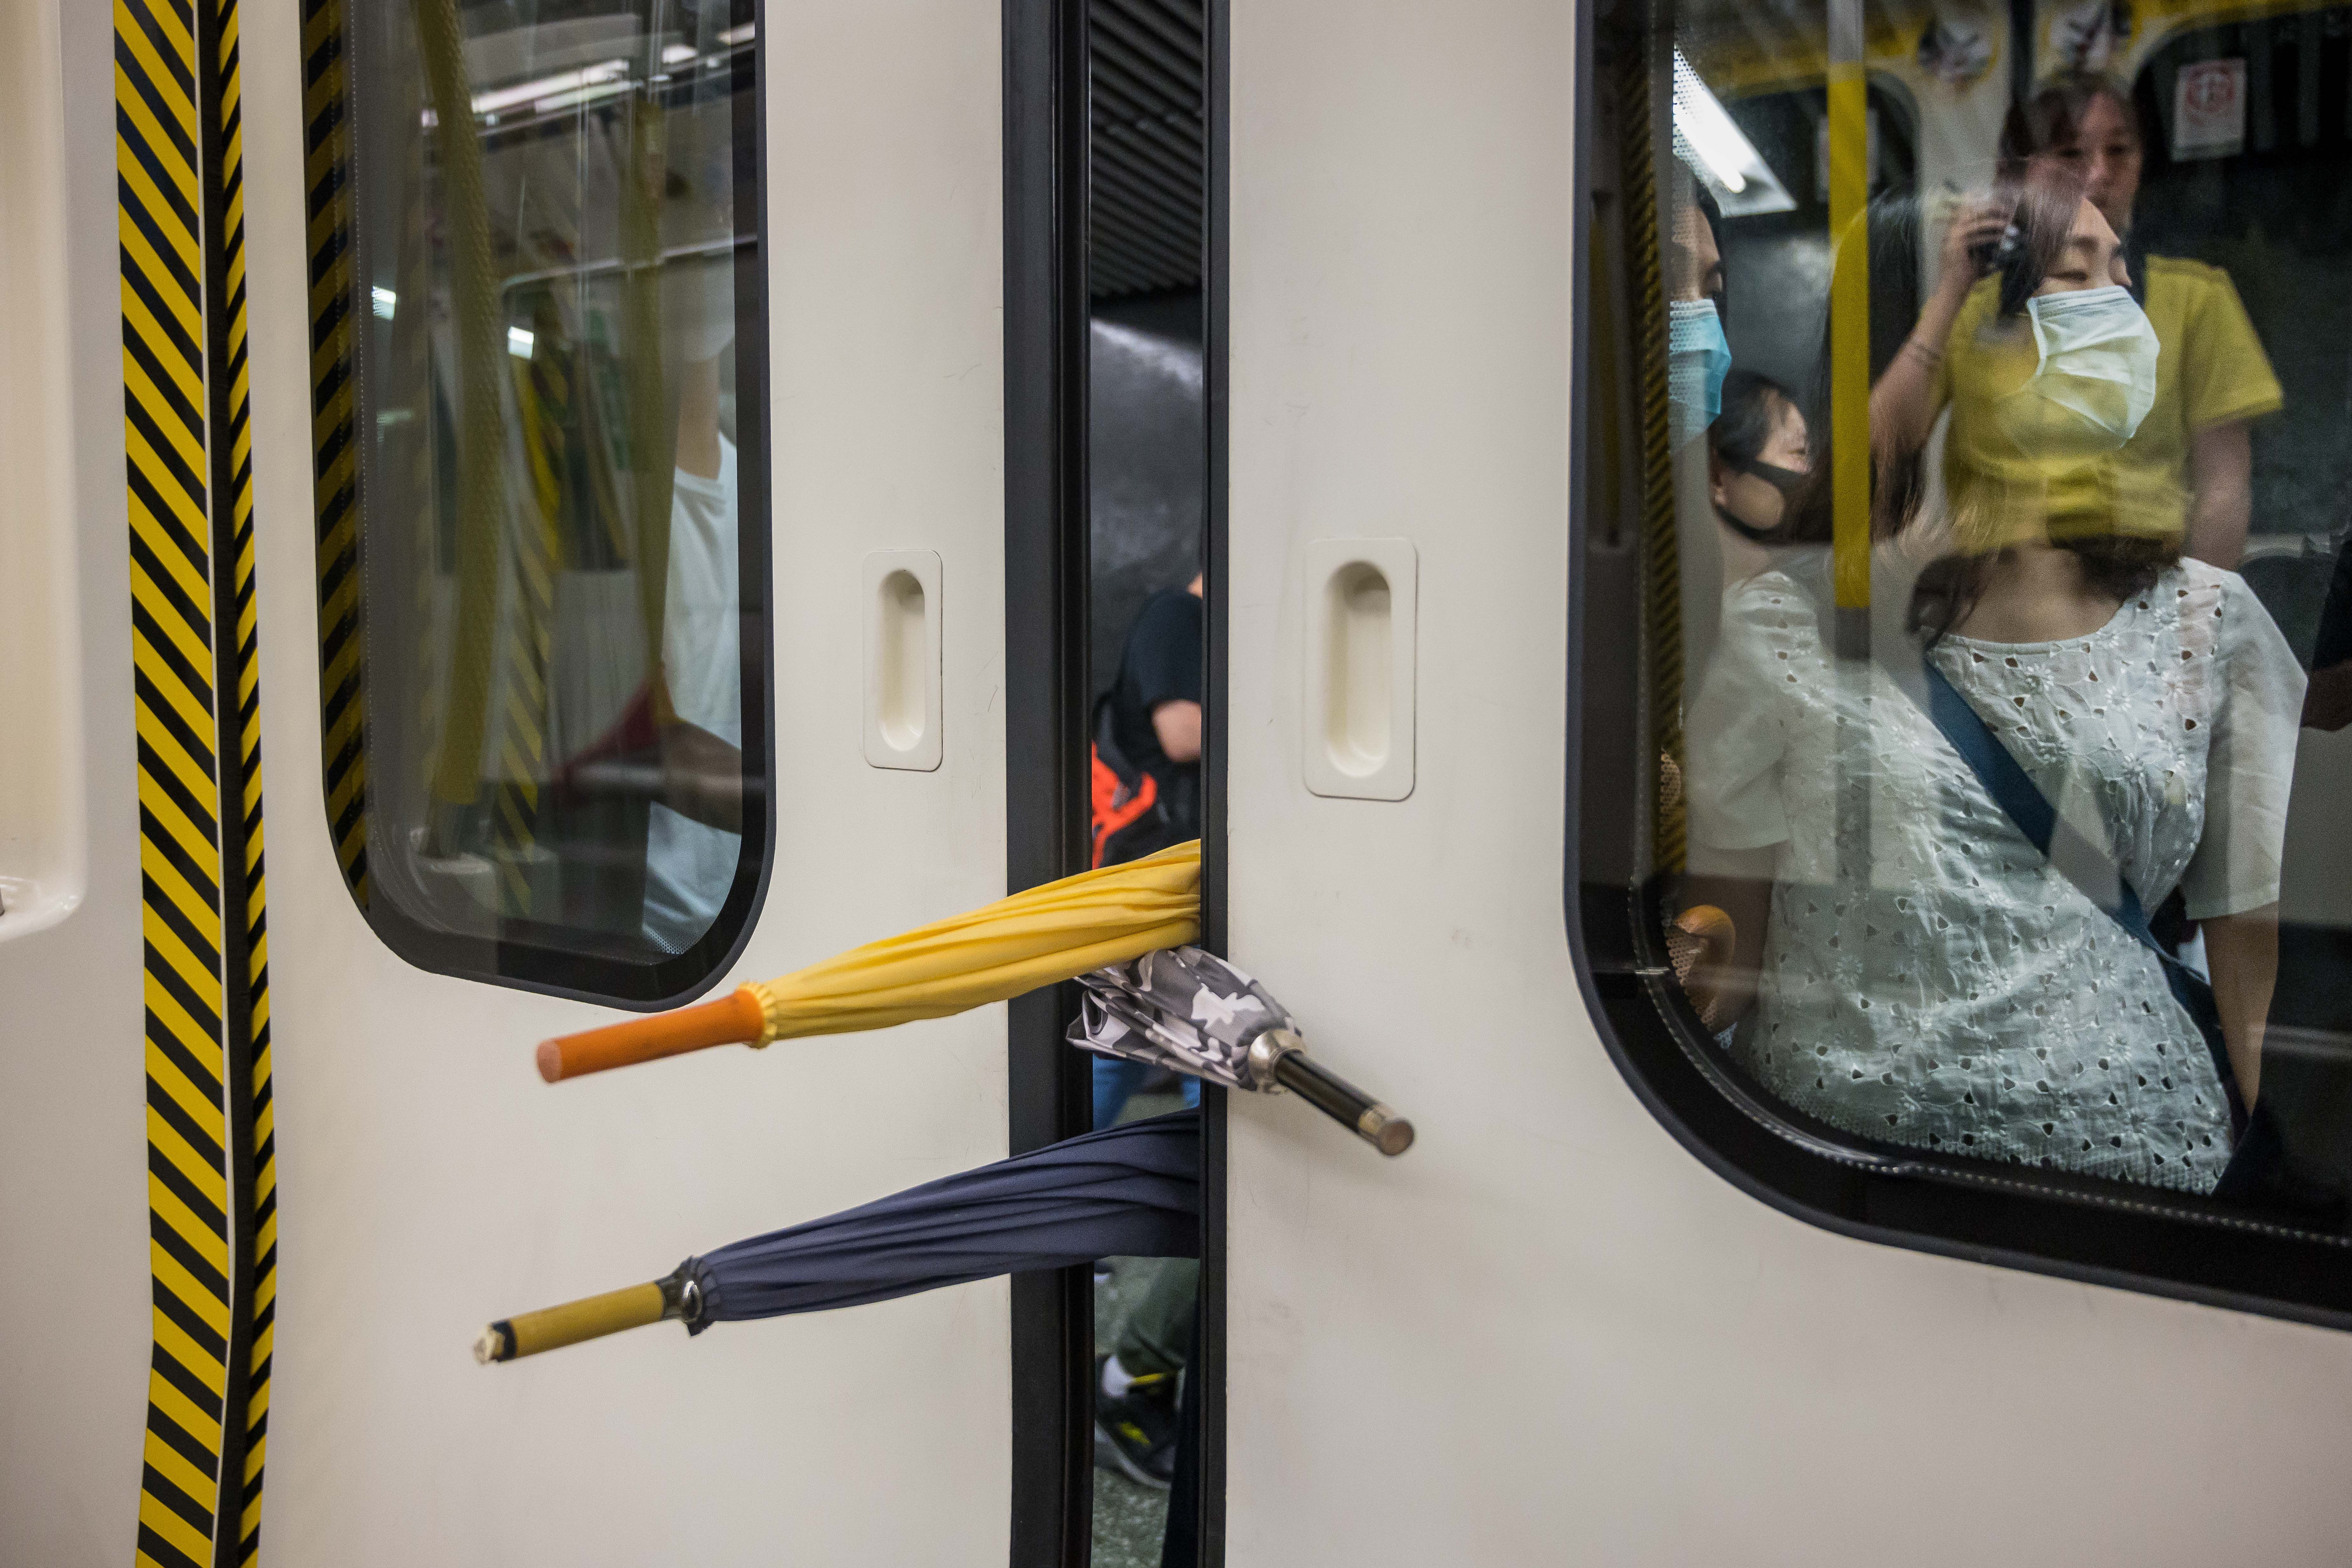 A group of protesters prevent the doors of a train from closing on August 5, 2019 in Hong Kong.